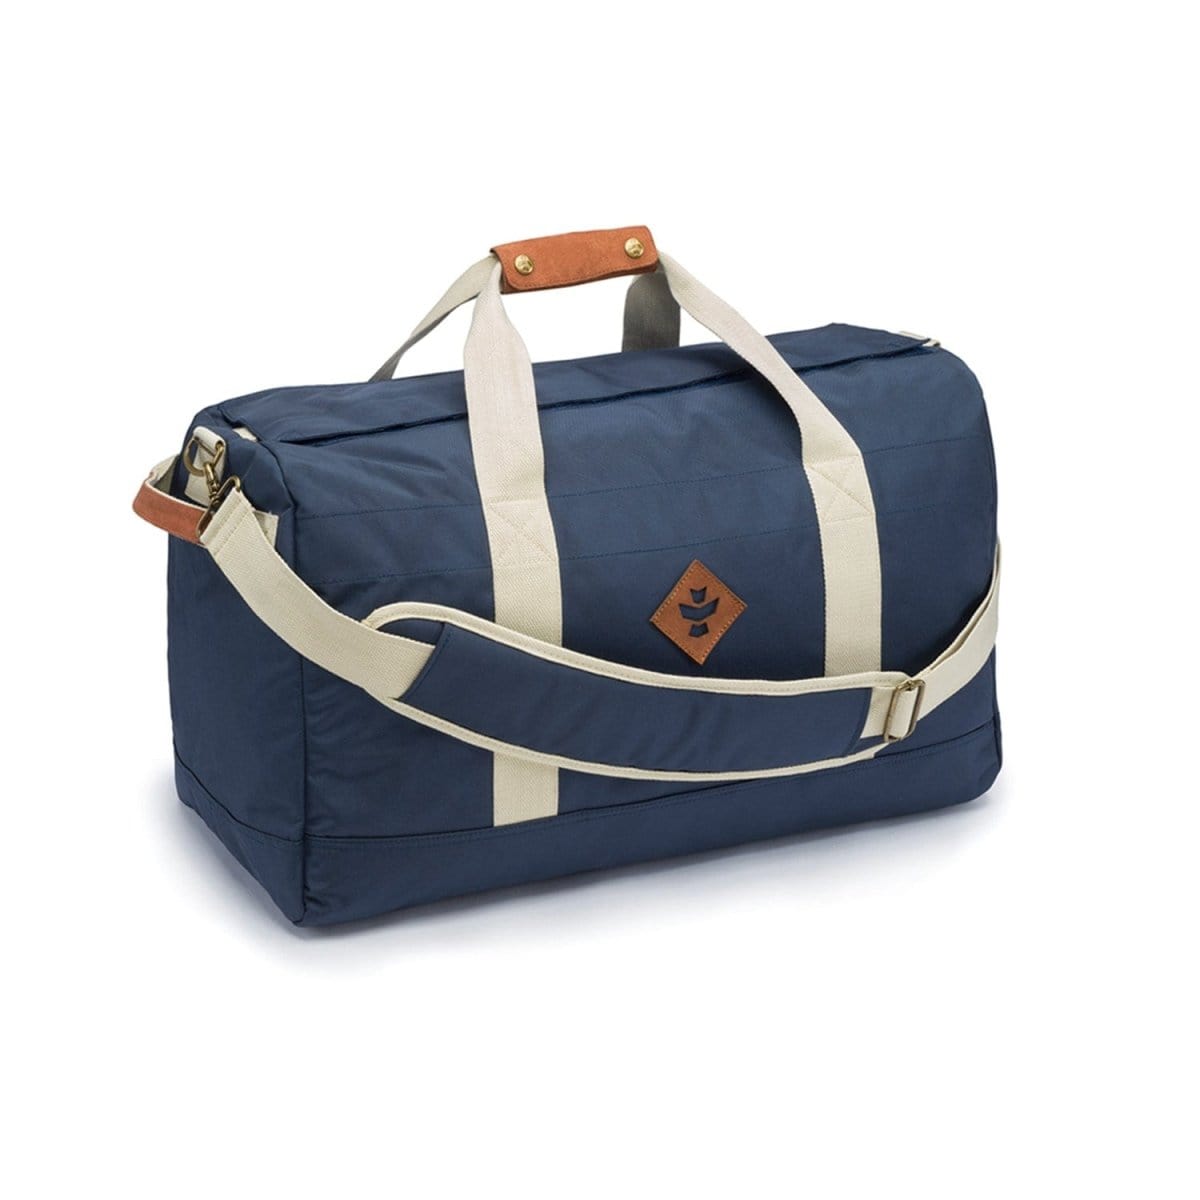 Revelry Supply Travel Bag Navy Blue The Around-Towner - Smell Proof Medium Duffle